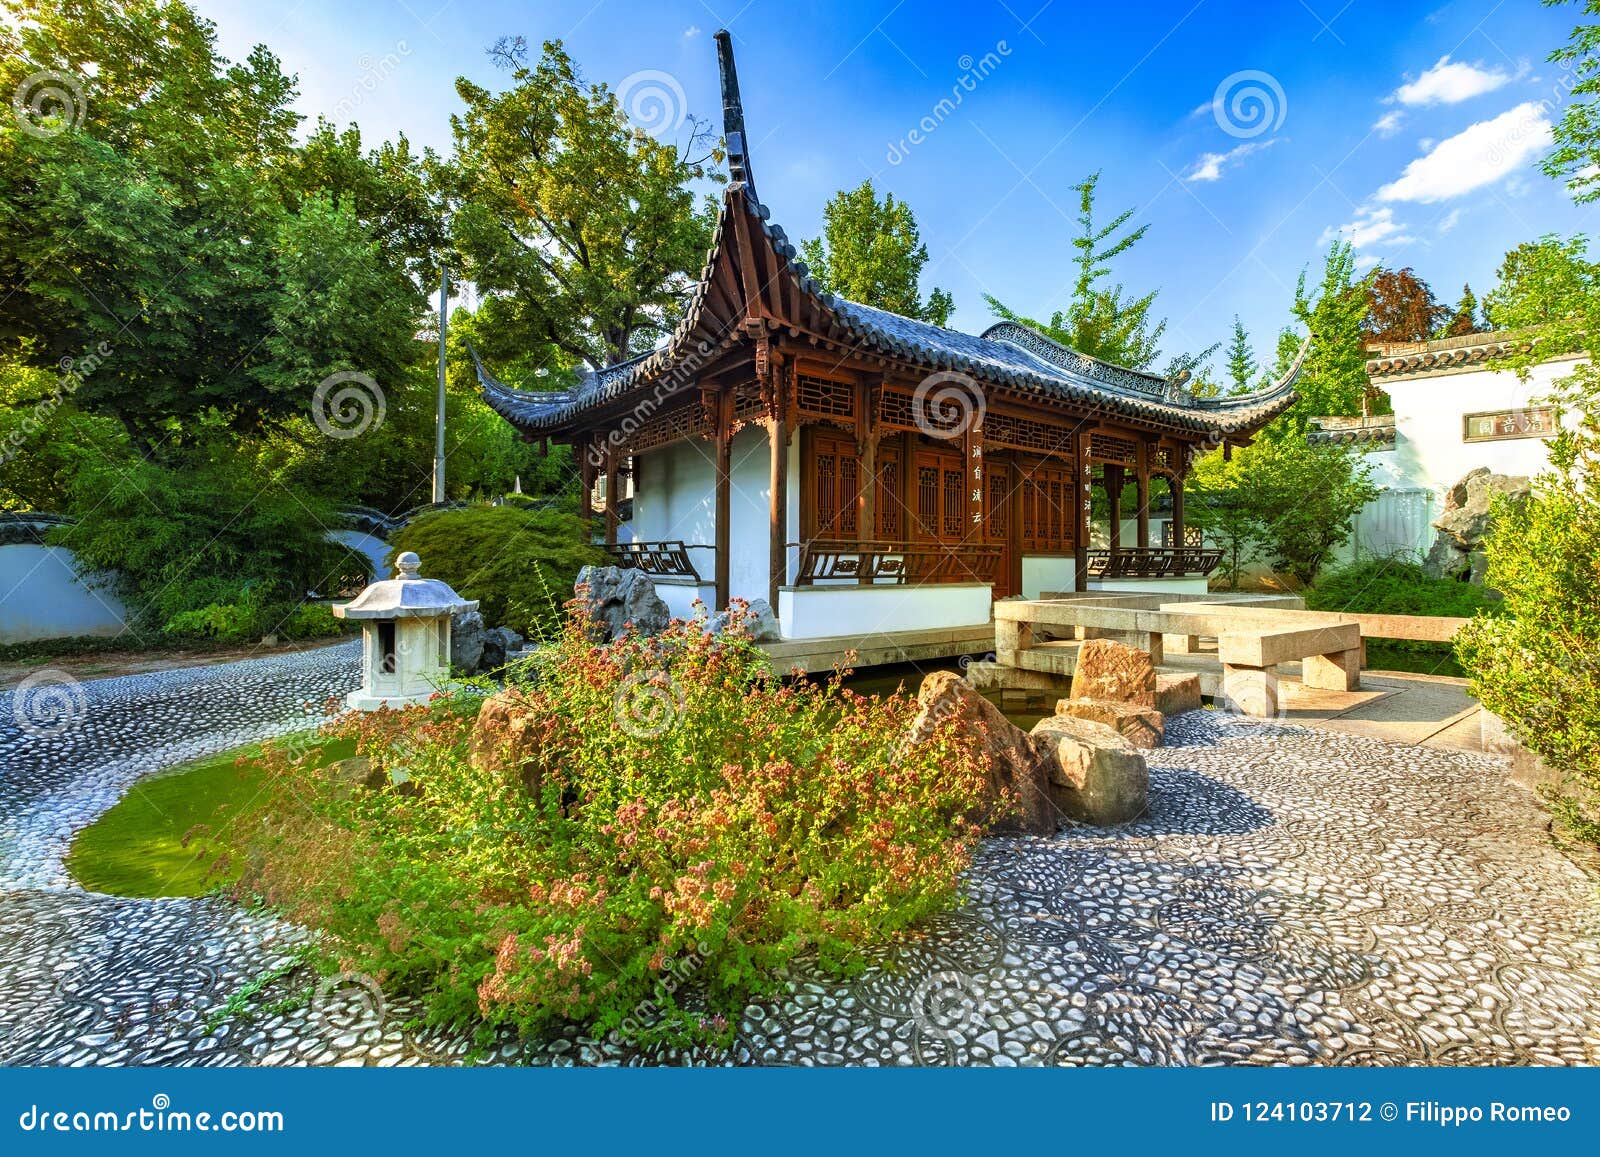 119 592 China Garden Photos Free Royalty Free Stock Photos From Dreamstime